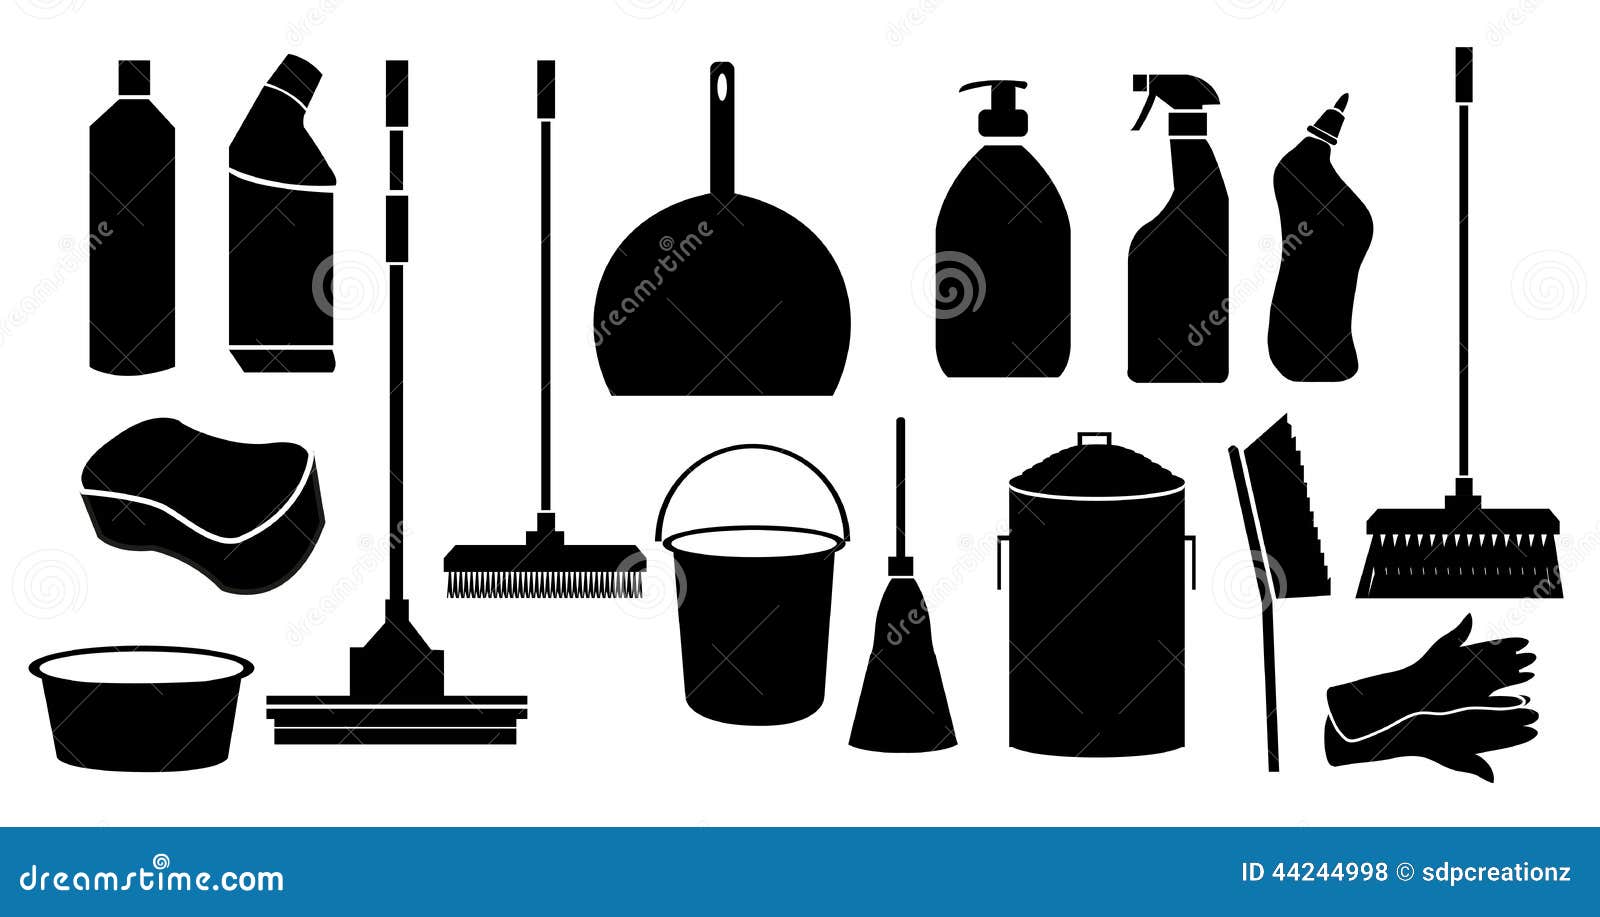 clipart of cleaning tools - photo #29